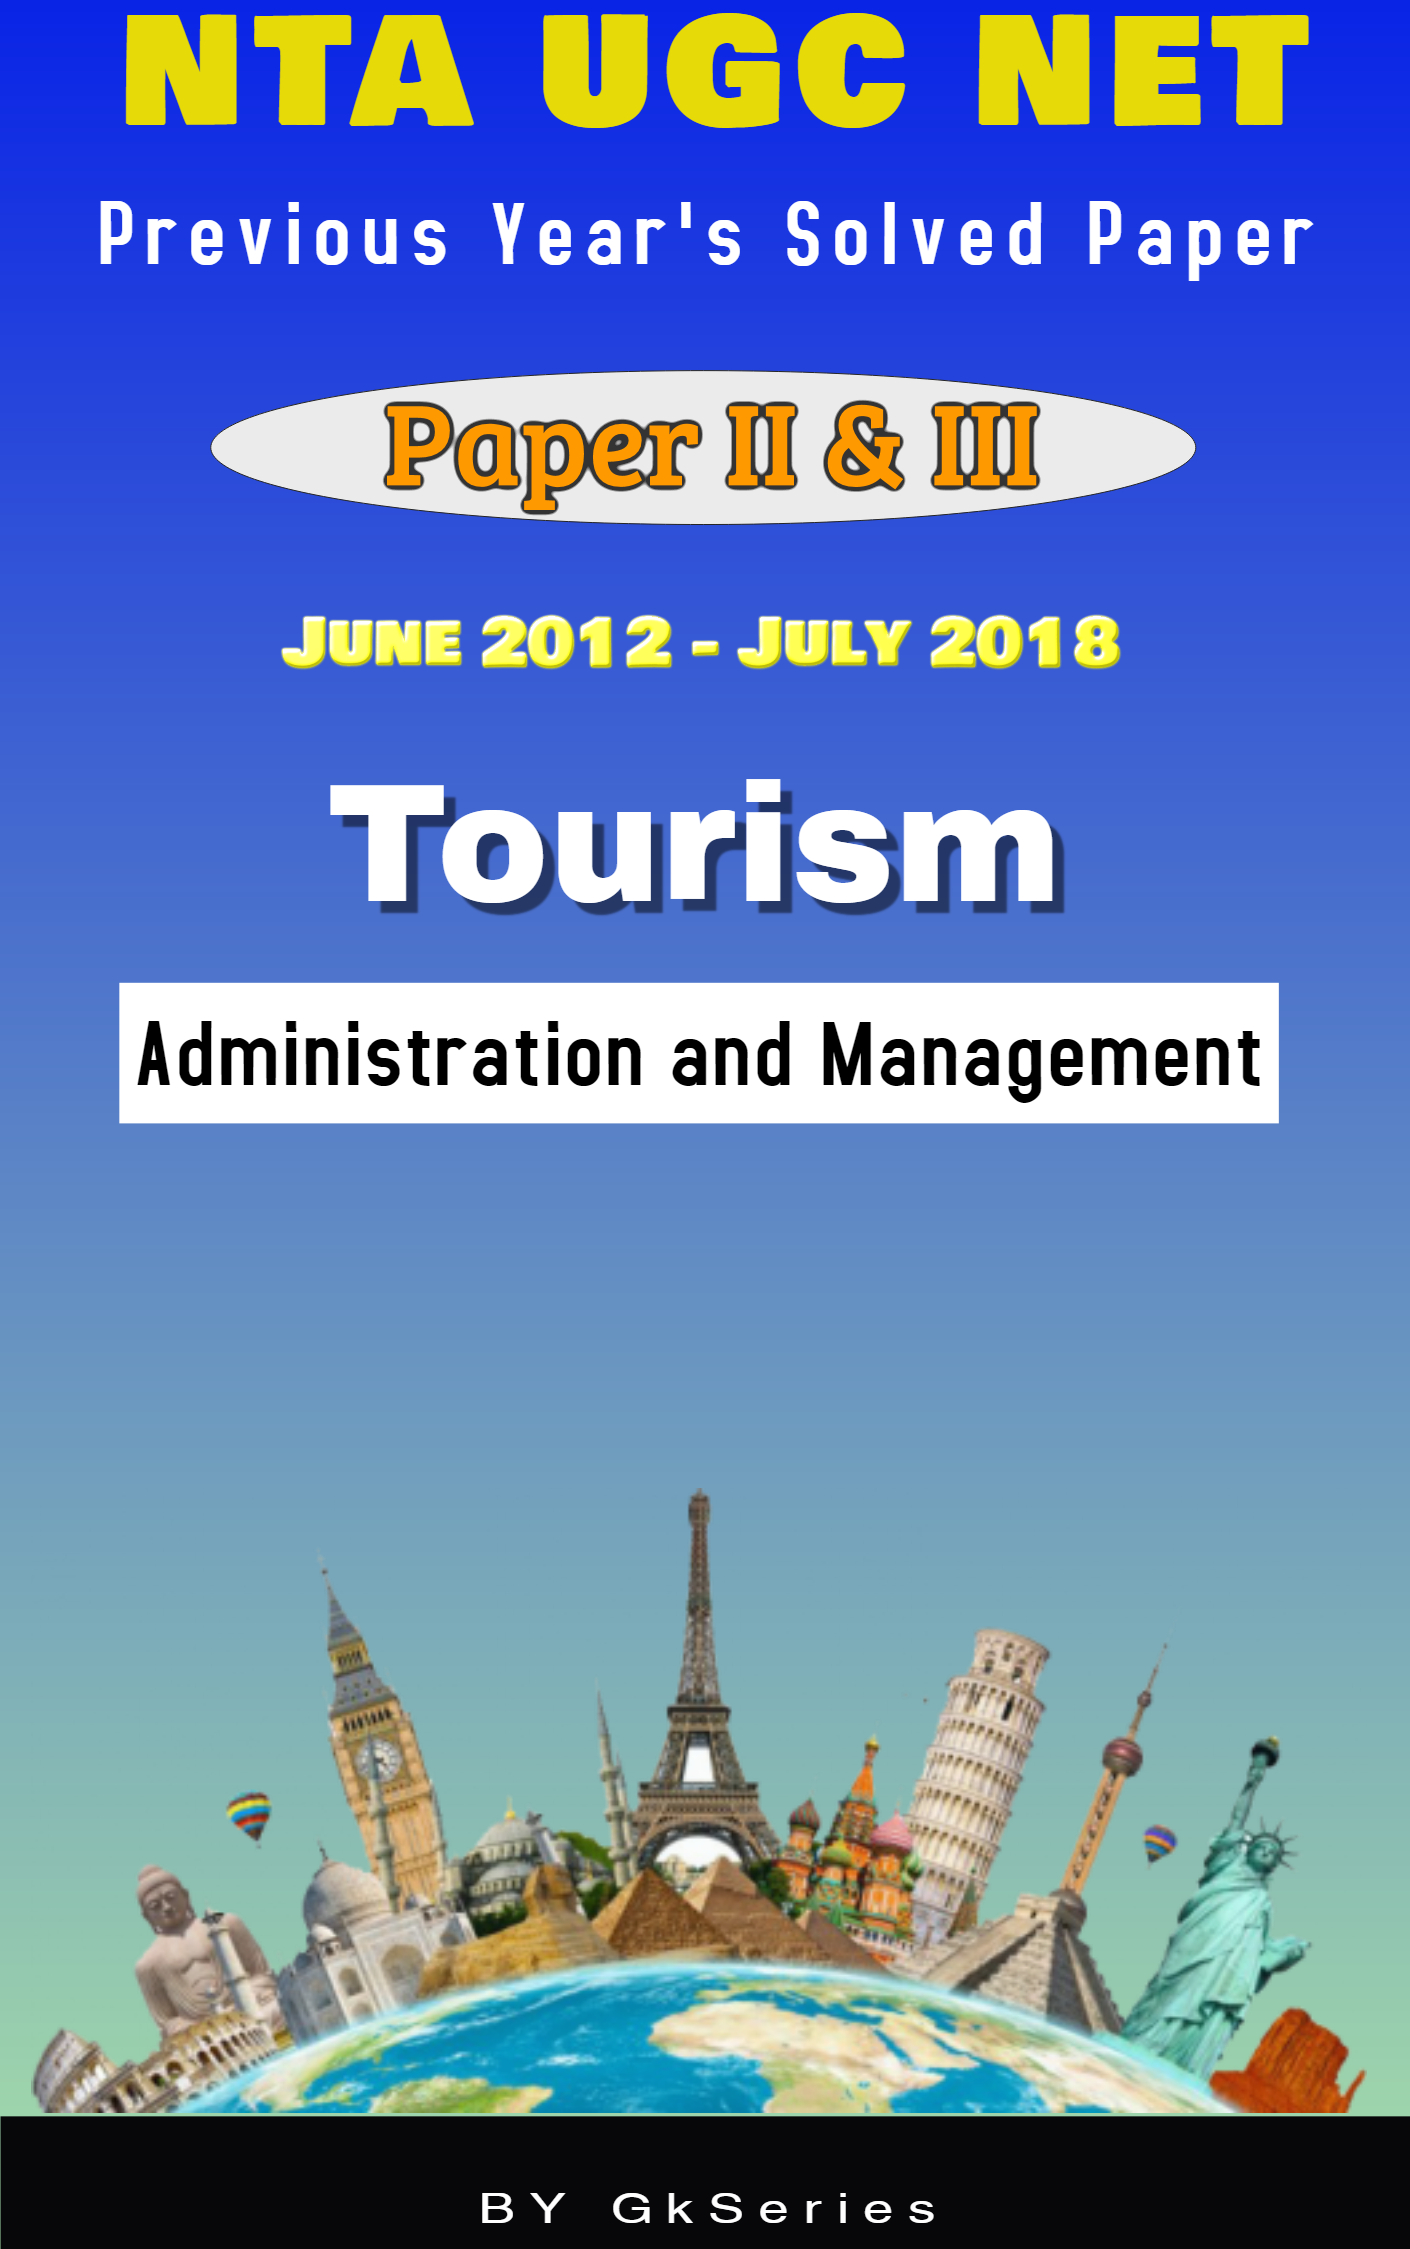 NTA UGC NET TOURISM ADMINISTRATION PREVIOUS YEARS SOLVED PAPERS